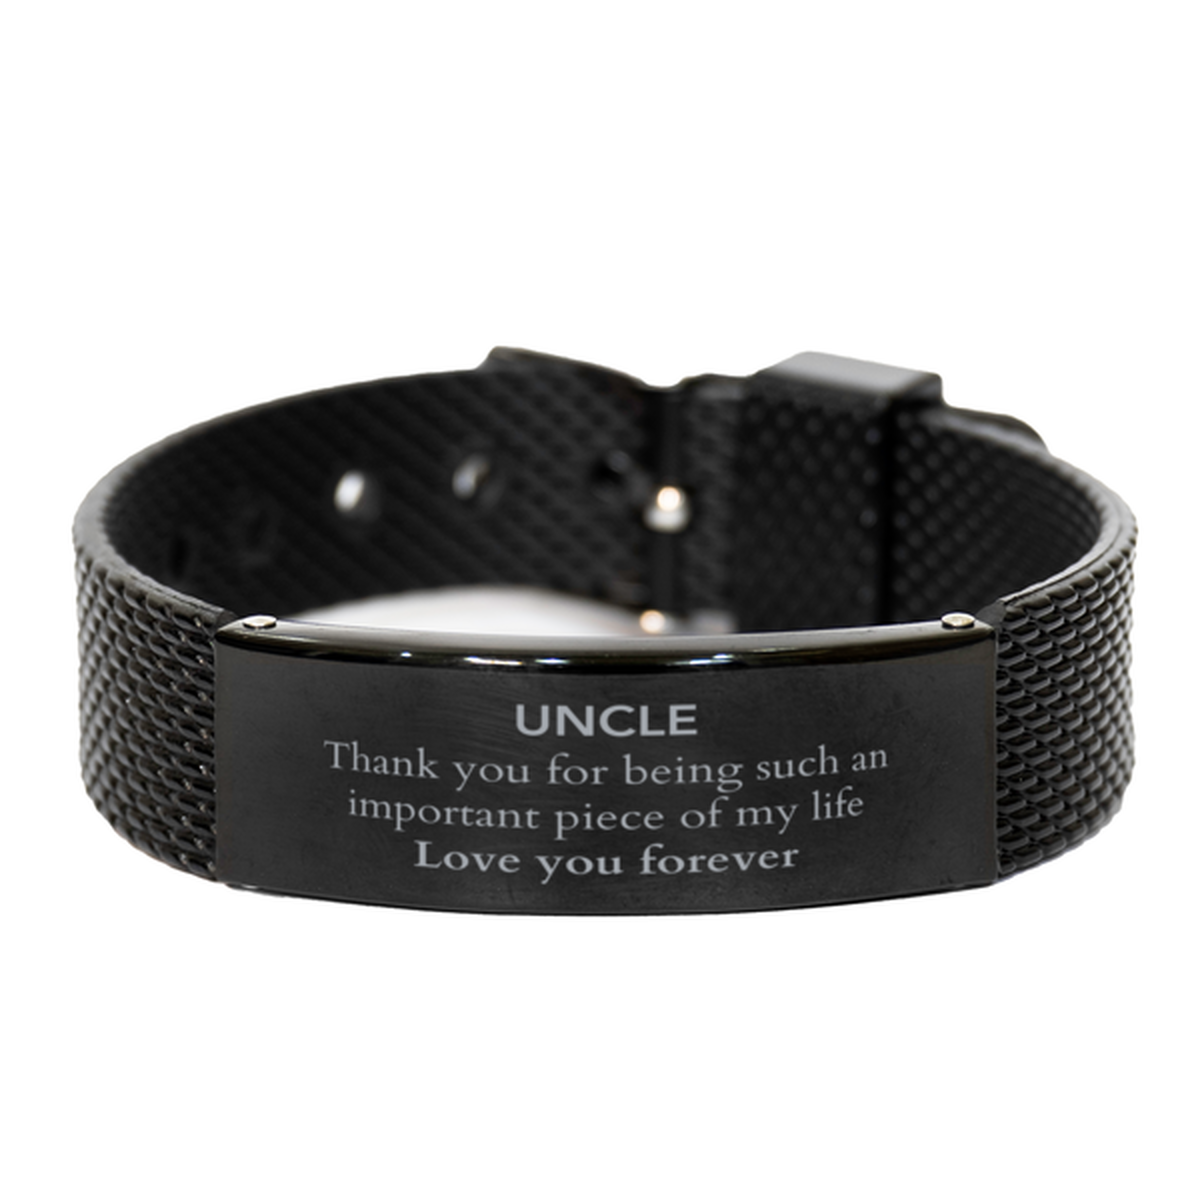 Appropriate Uncle Black Shark Mesh Bracelet Epic Birthday Gifts for Uncle Thank you for being such an important piece of my life Uncle Christmas Mothers Fathers Day